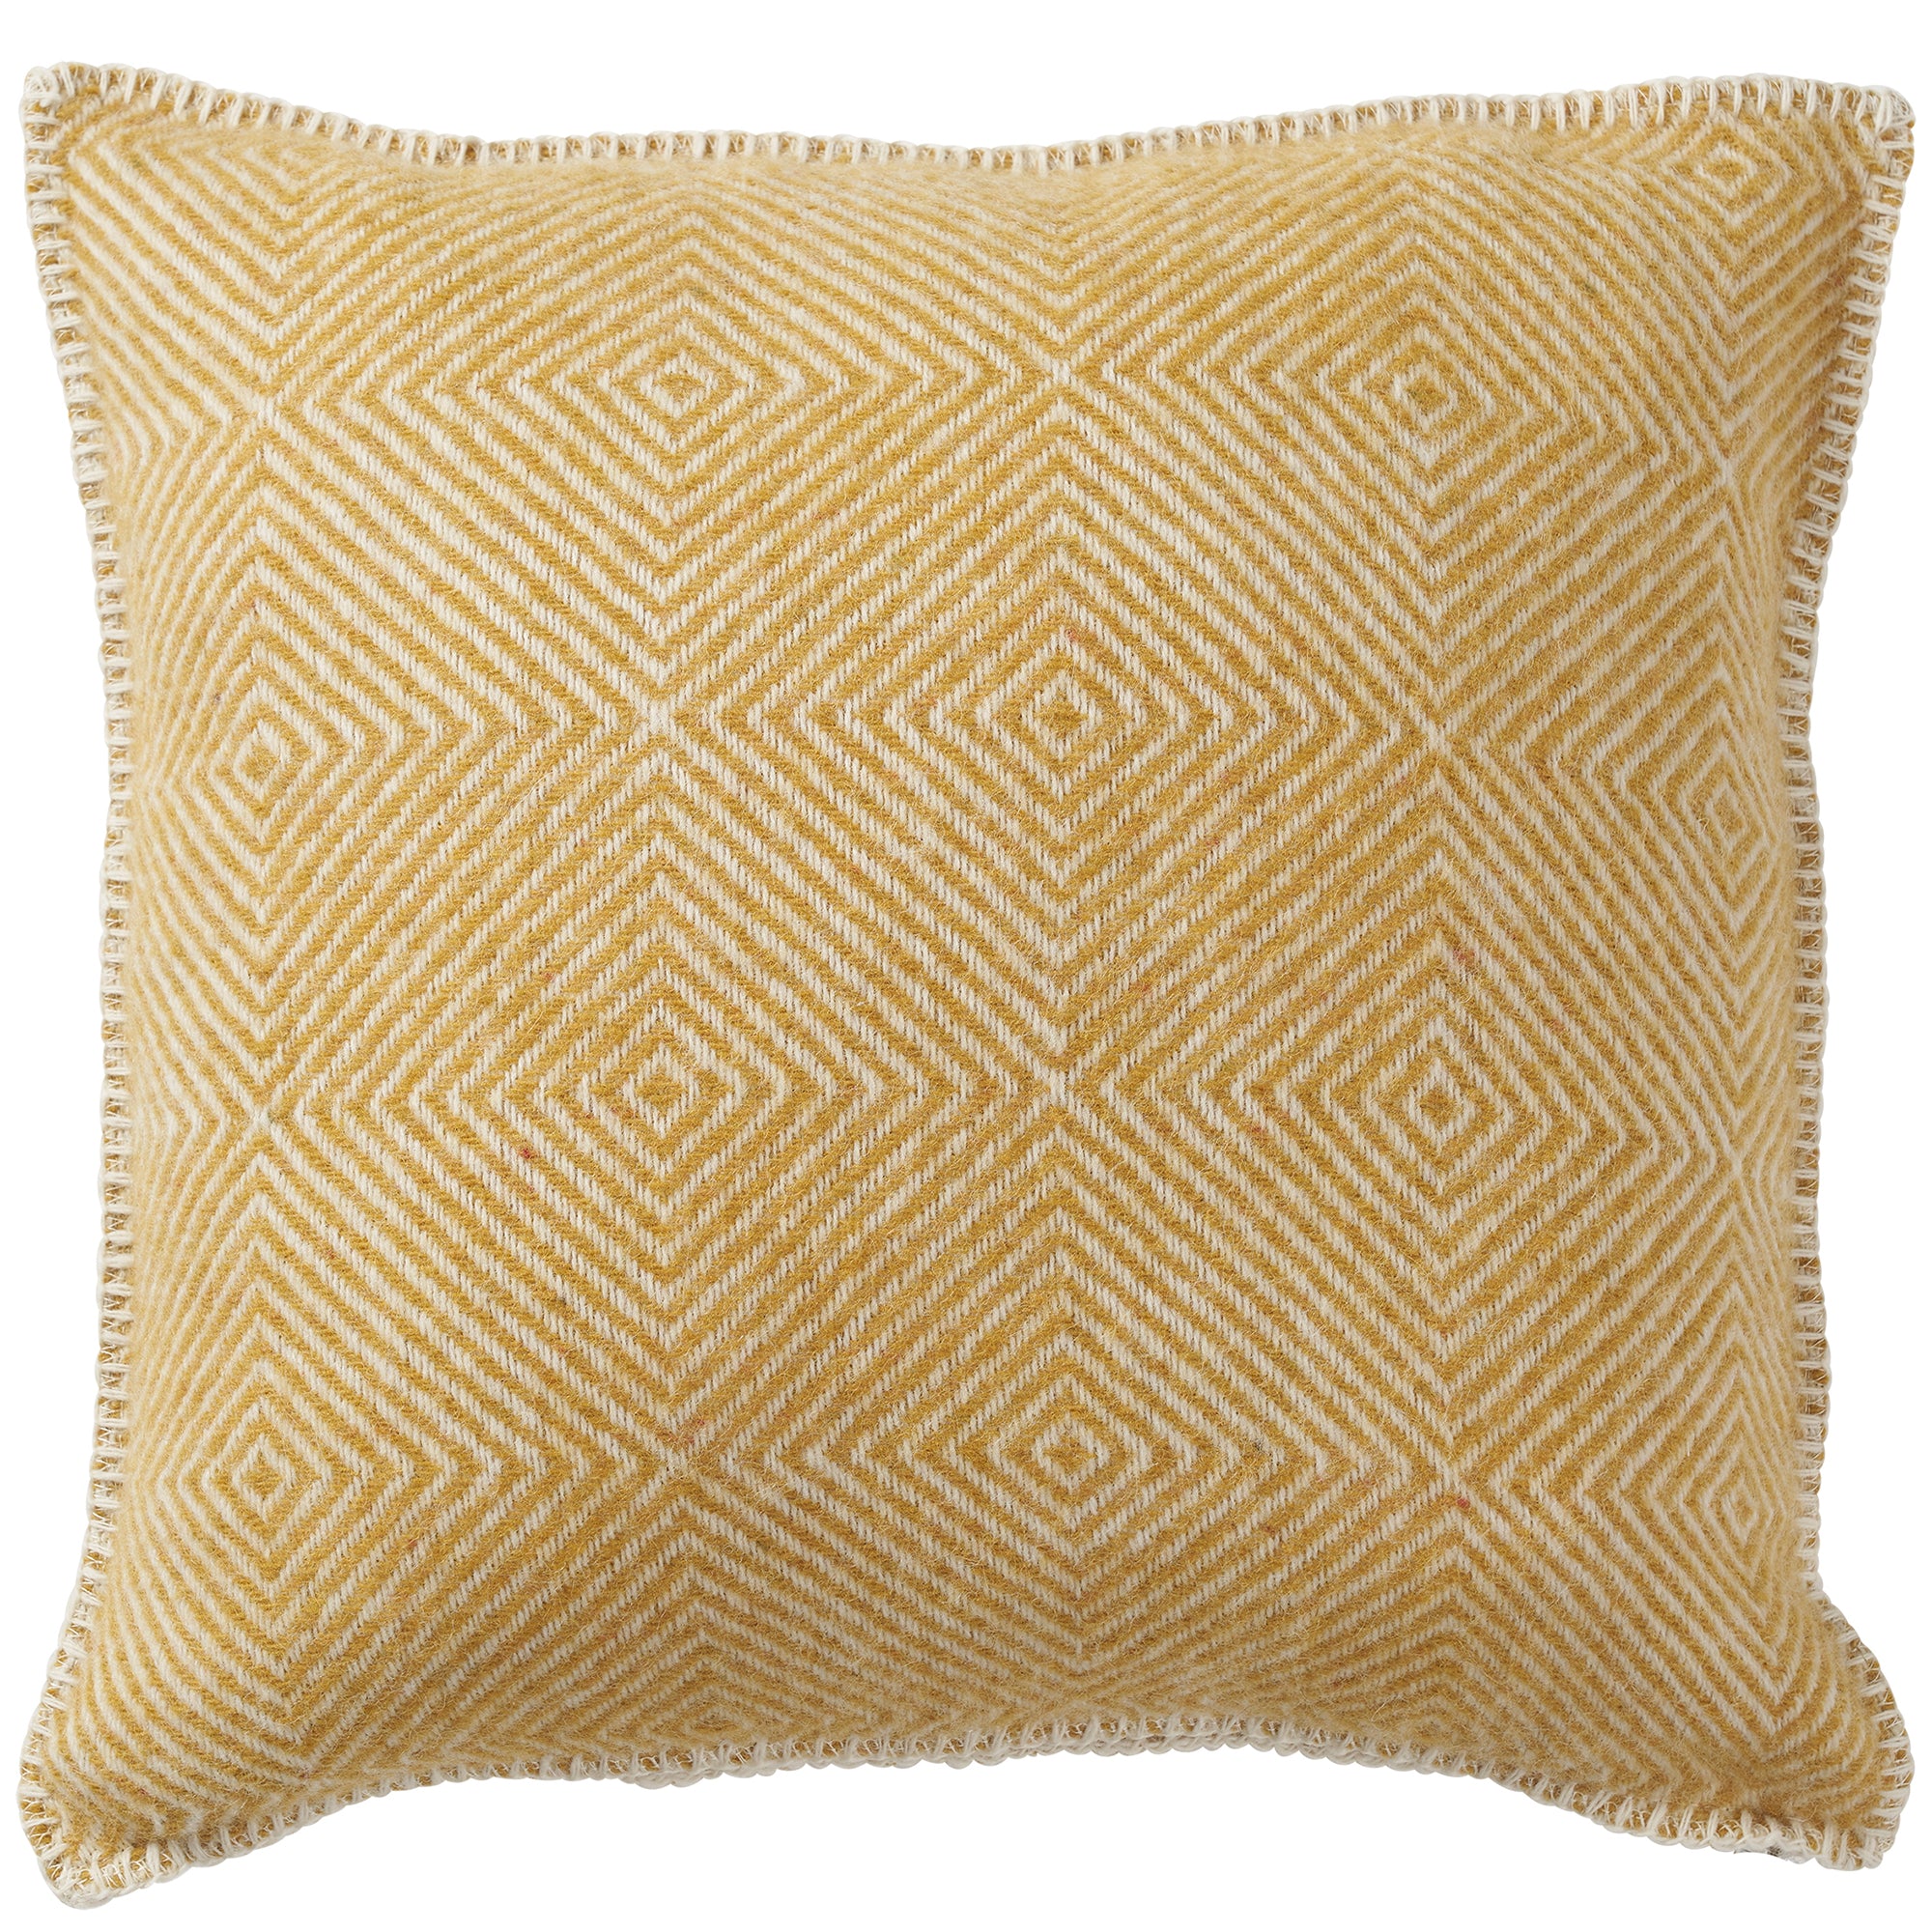 Gooseye Yellow 45x45cm Recycled Wool Cushion Cover